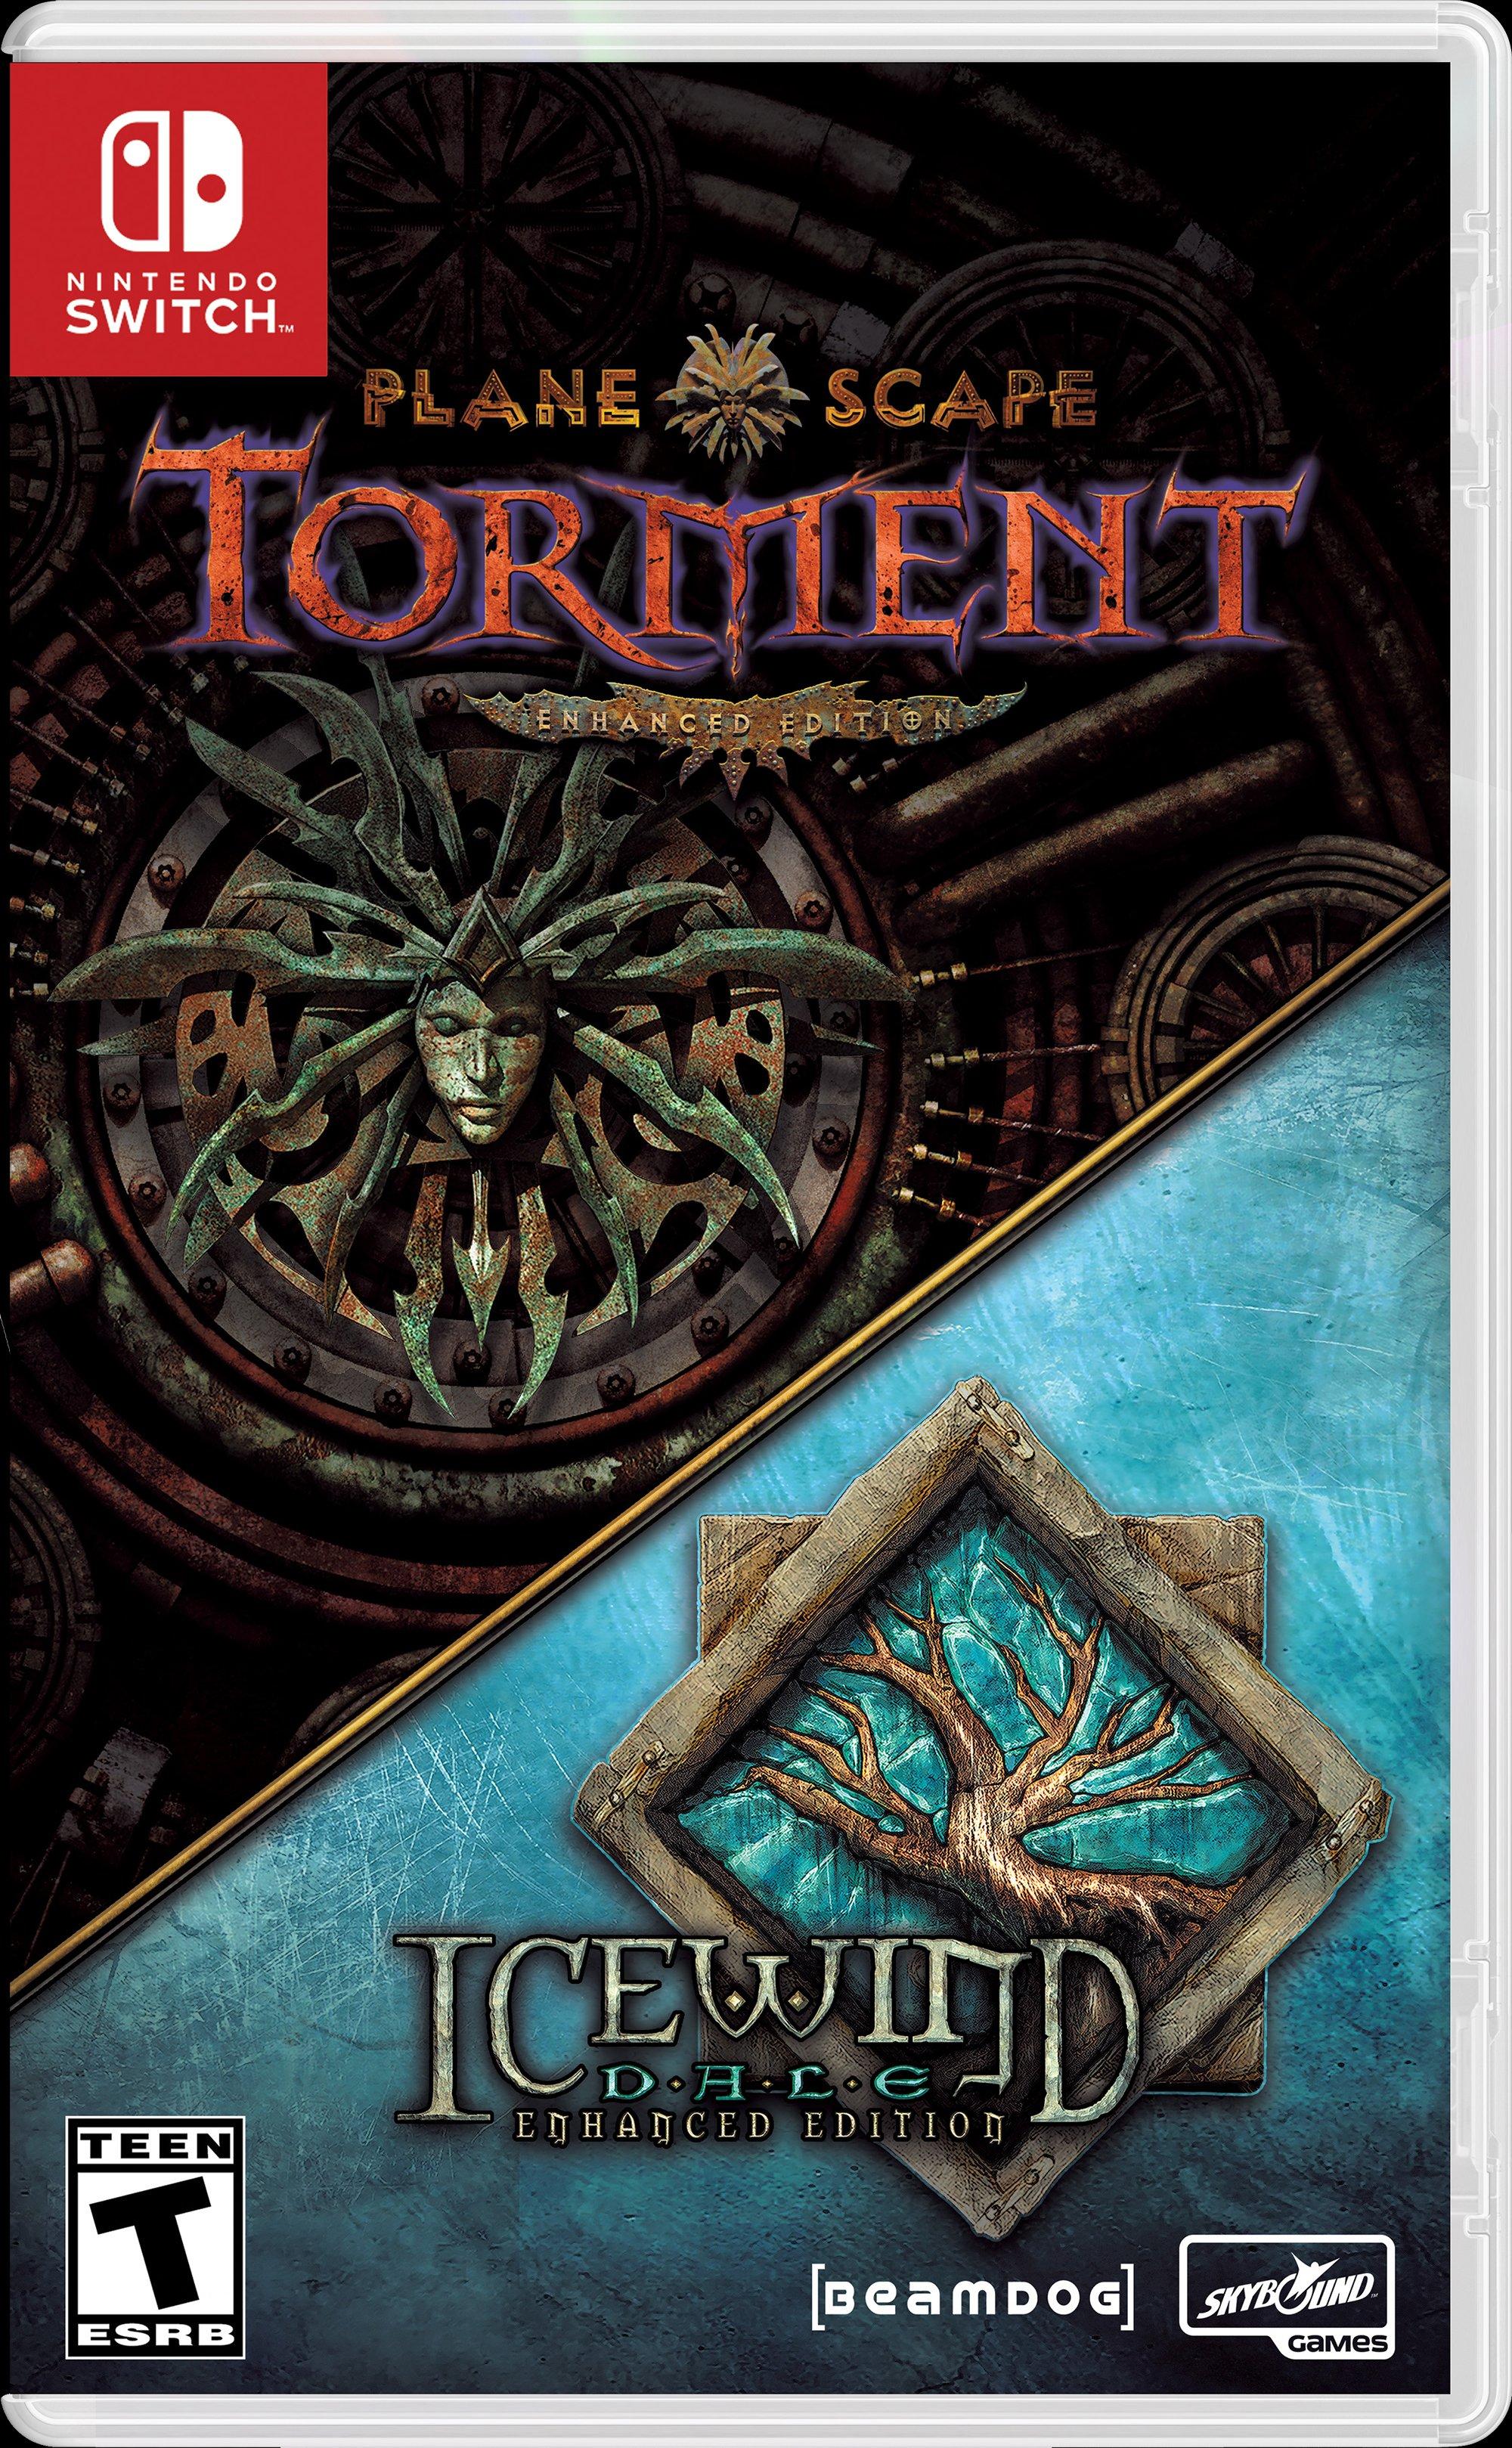 Planescape Torment and Icewind Enhanced Edition - Nintendo Switch |  Nintendo Switch | GameStop